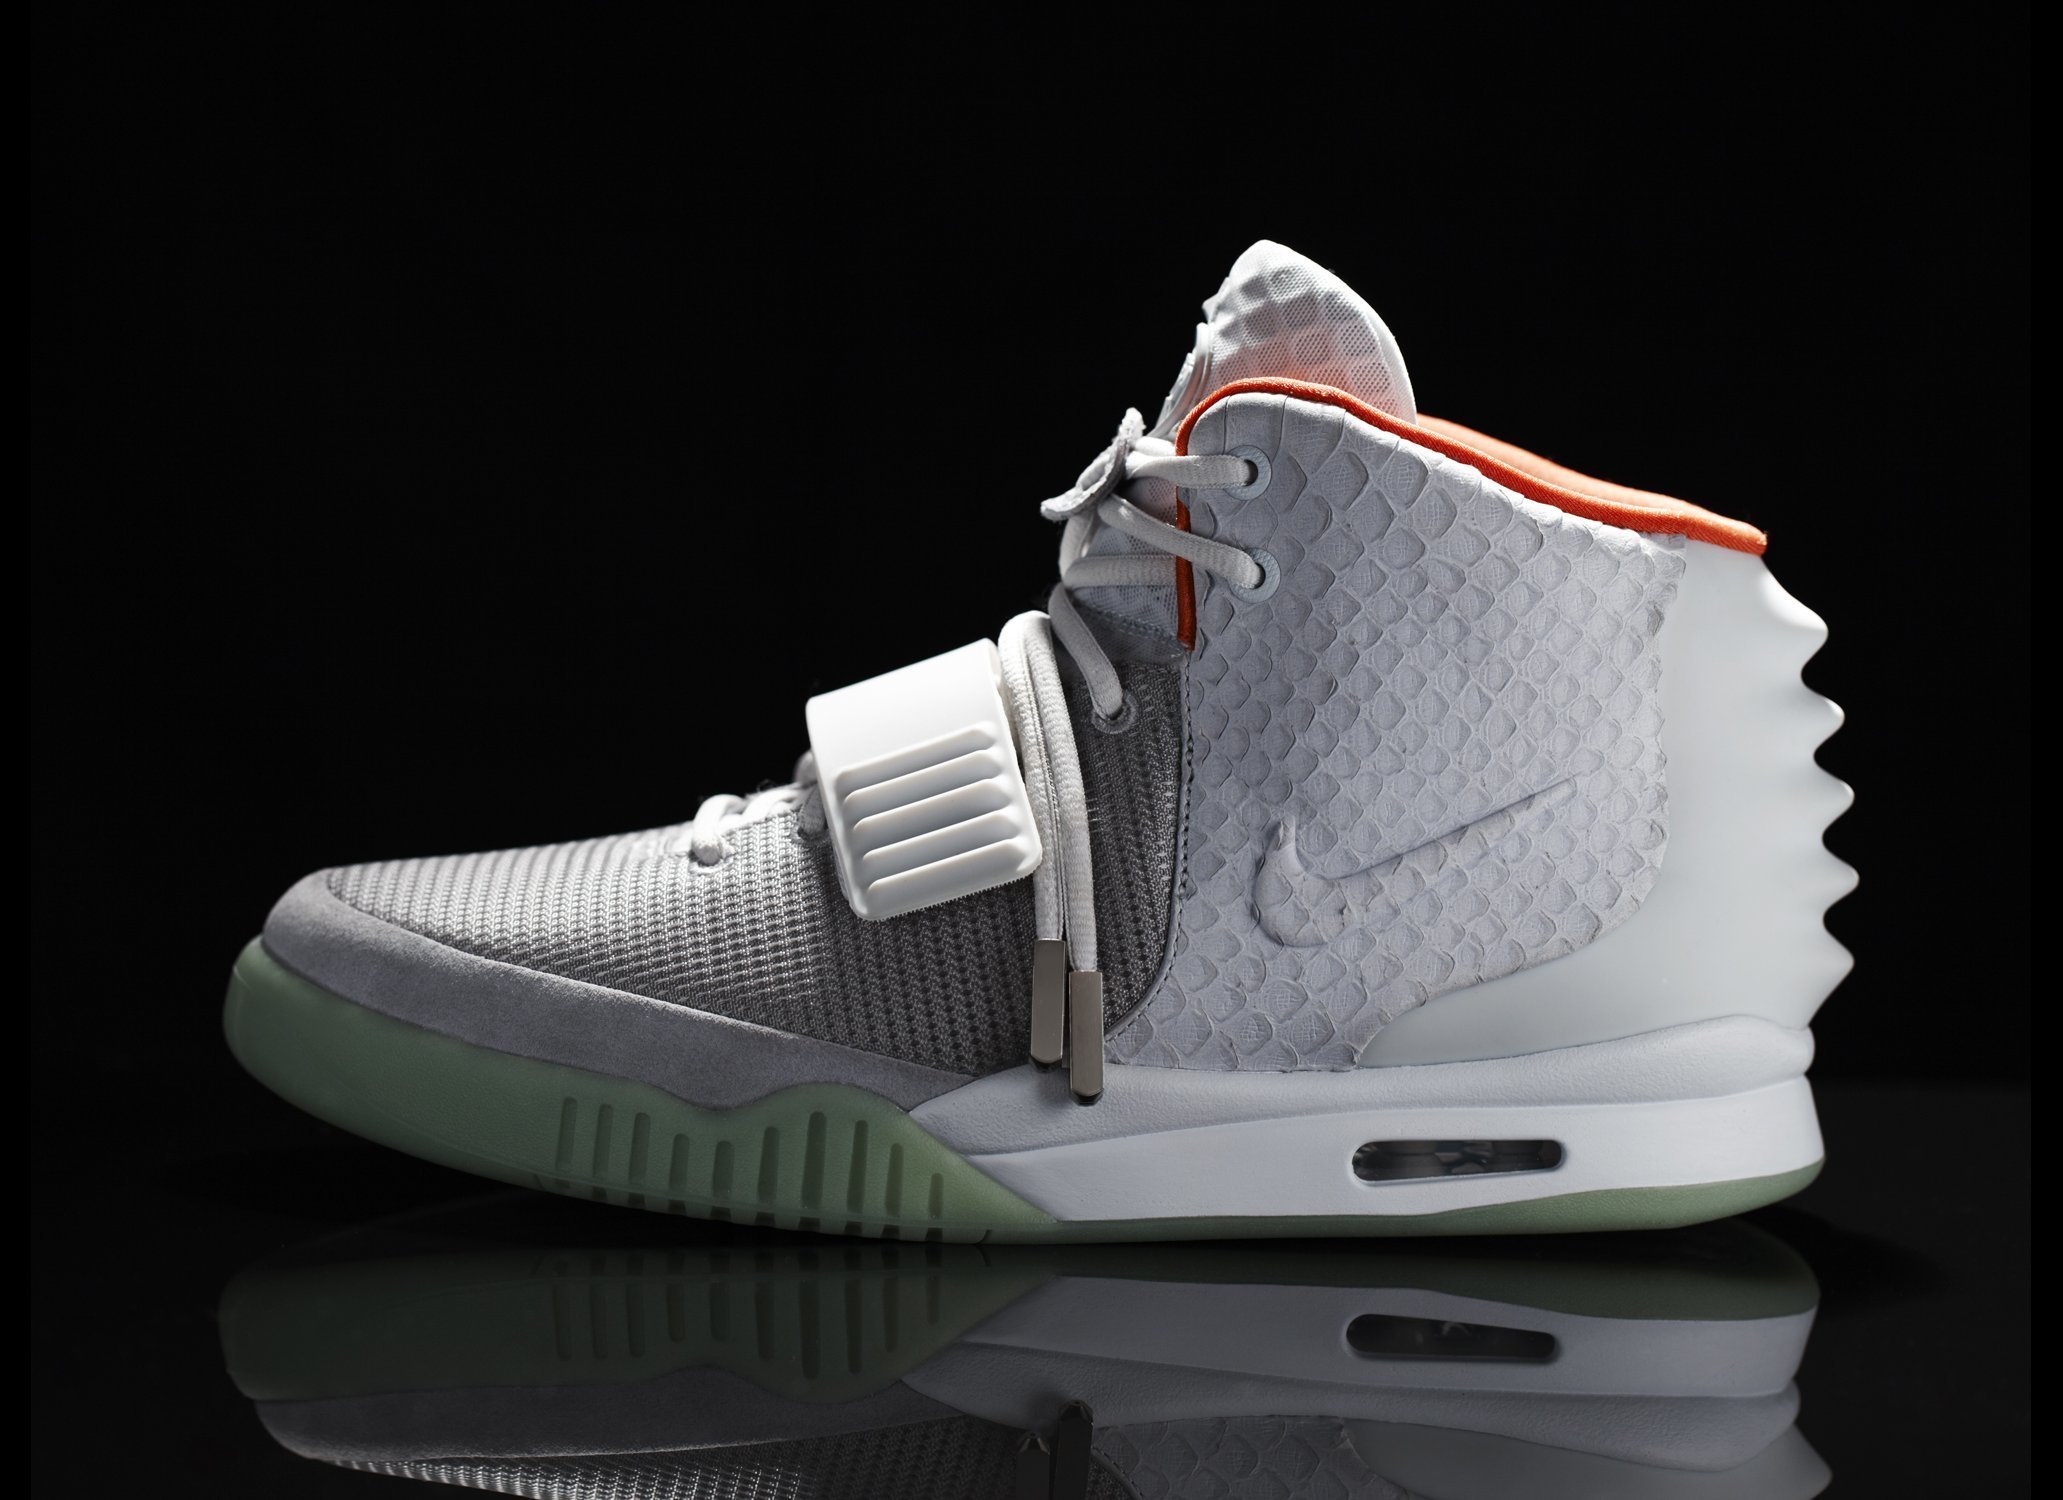 Kanye West's Nike Air Yeezy II Shoes Sell For $93,000 On eBay 